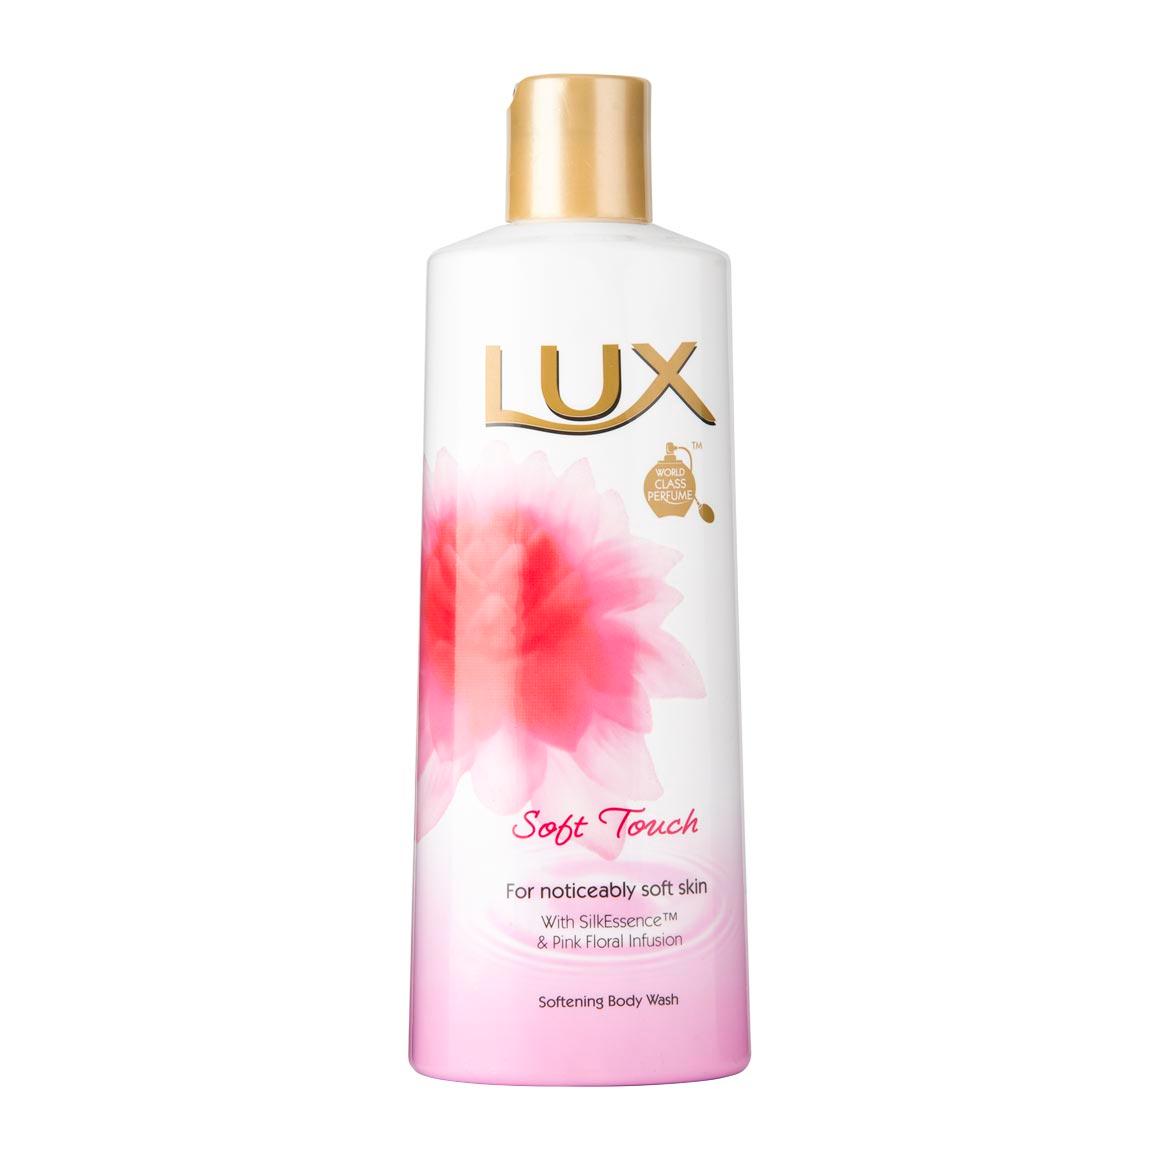 Caress (Lux) Body Wash Commercial Inspiration Starts Here (2020) 